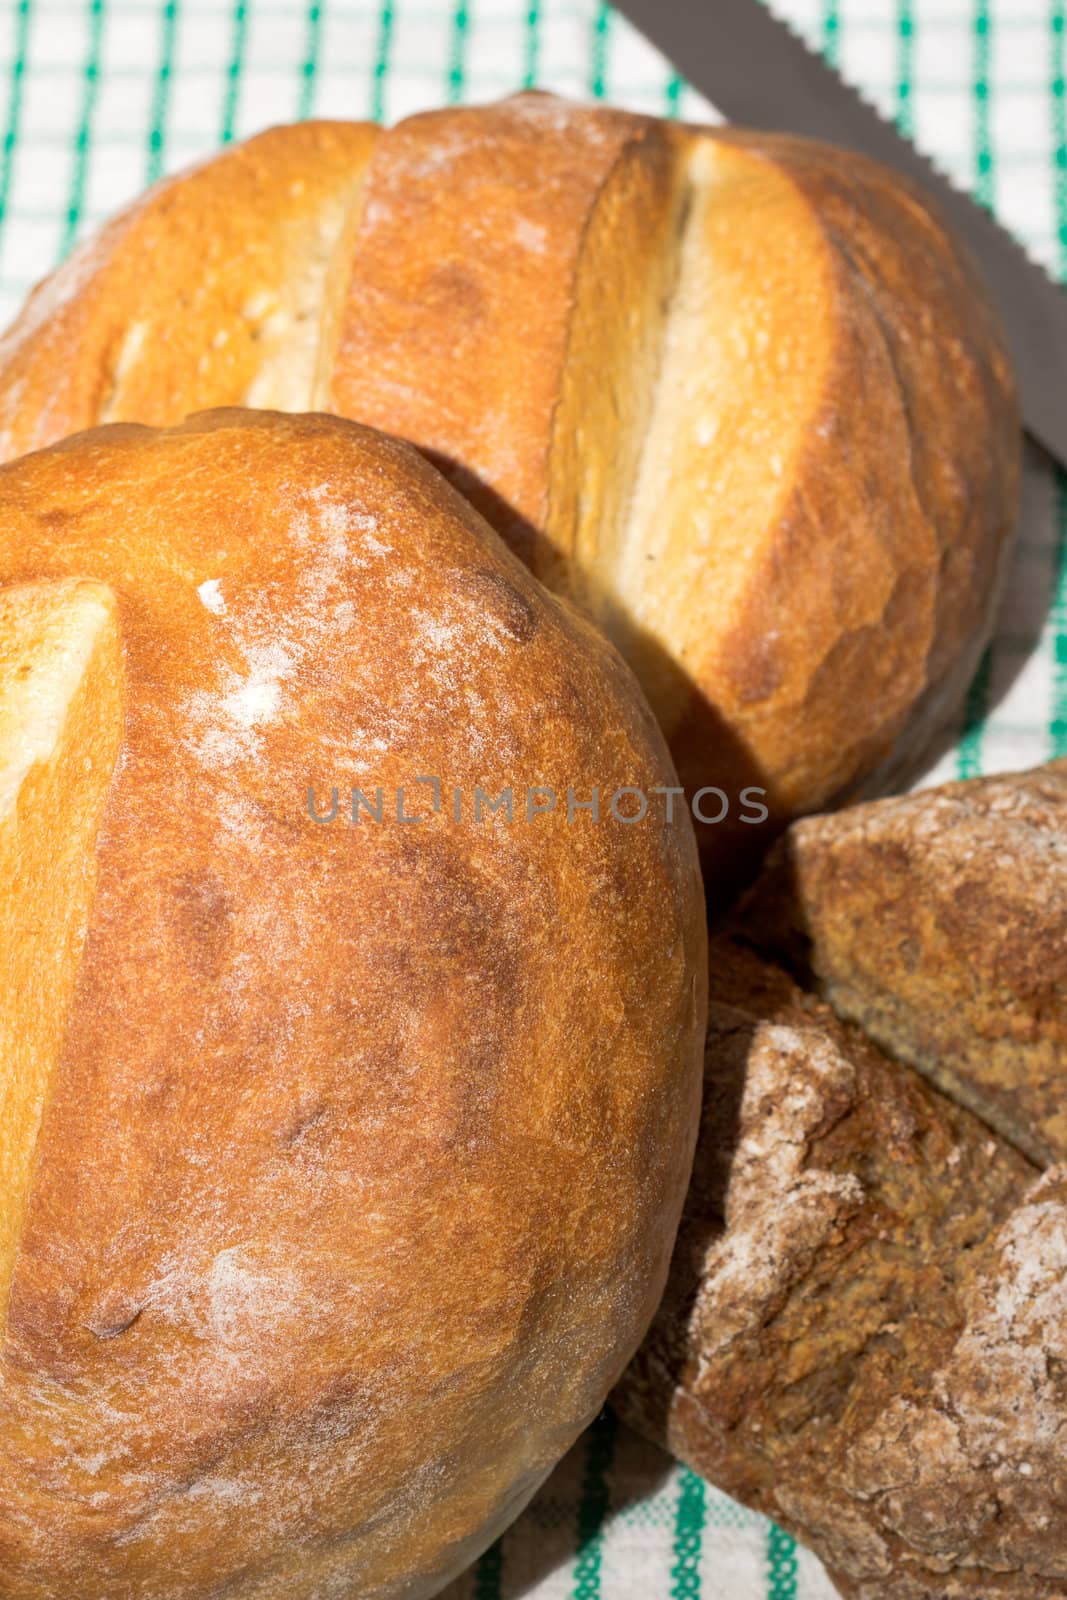 Oven fresh home baked bread